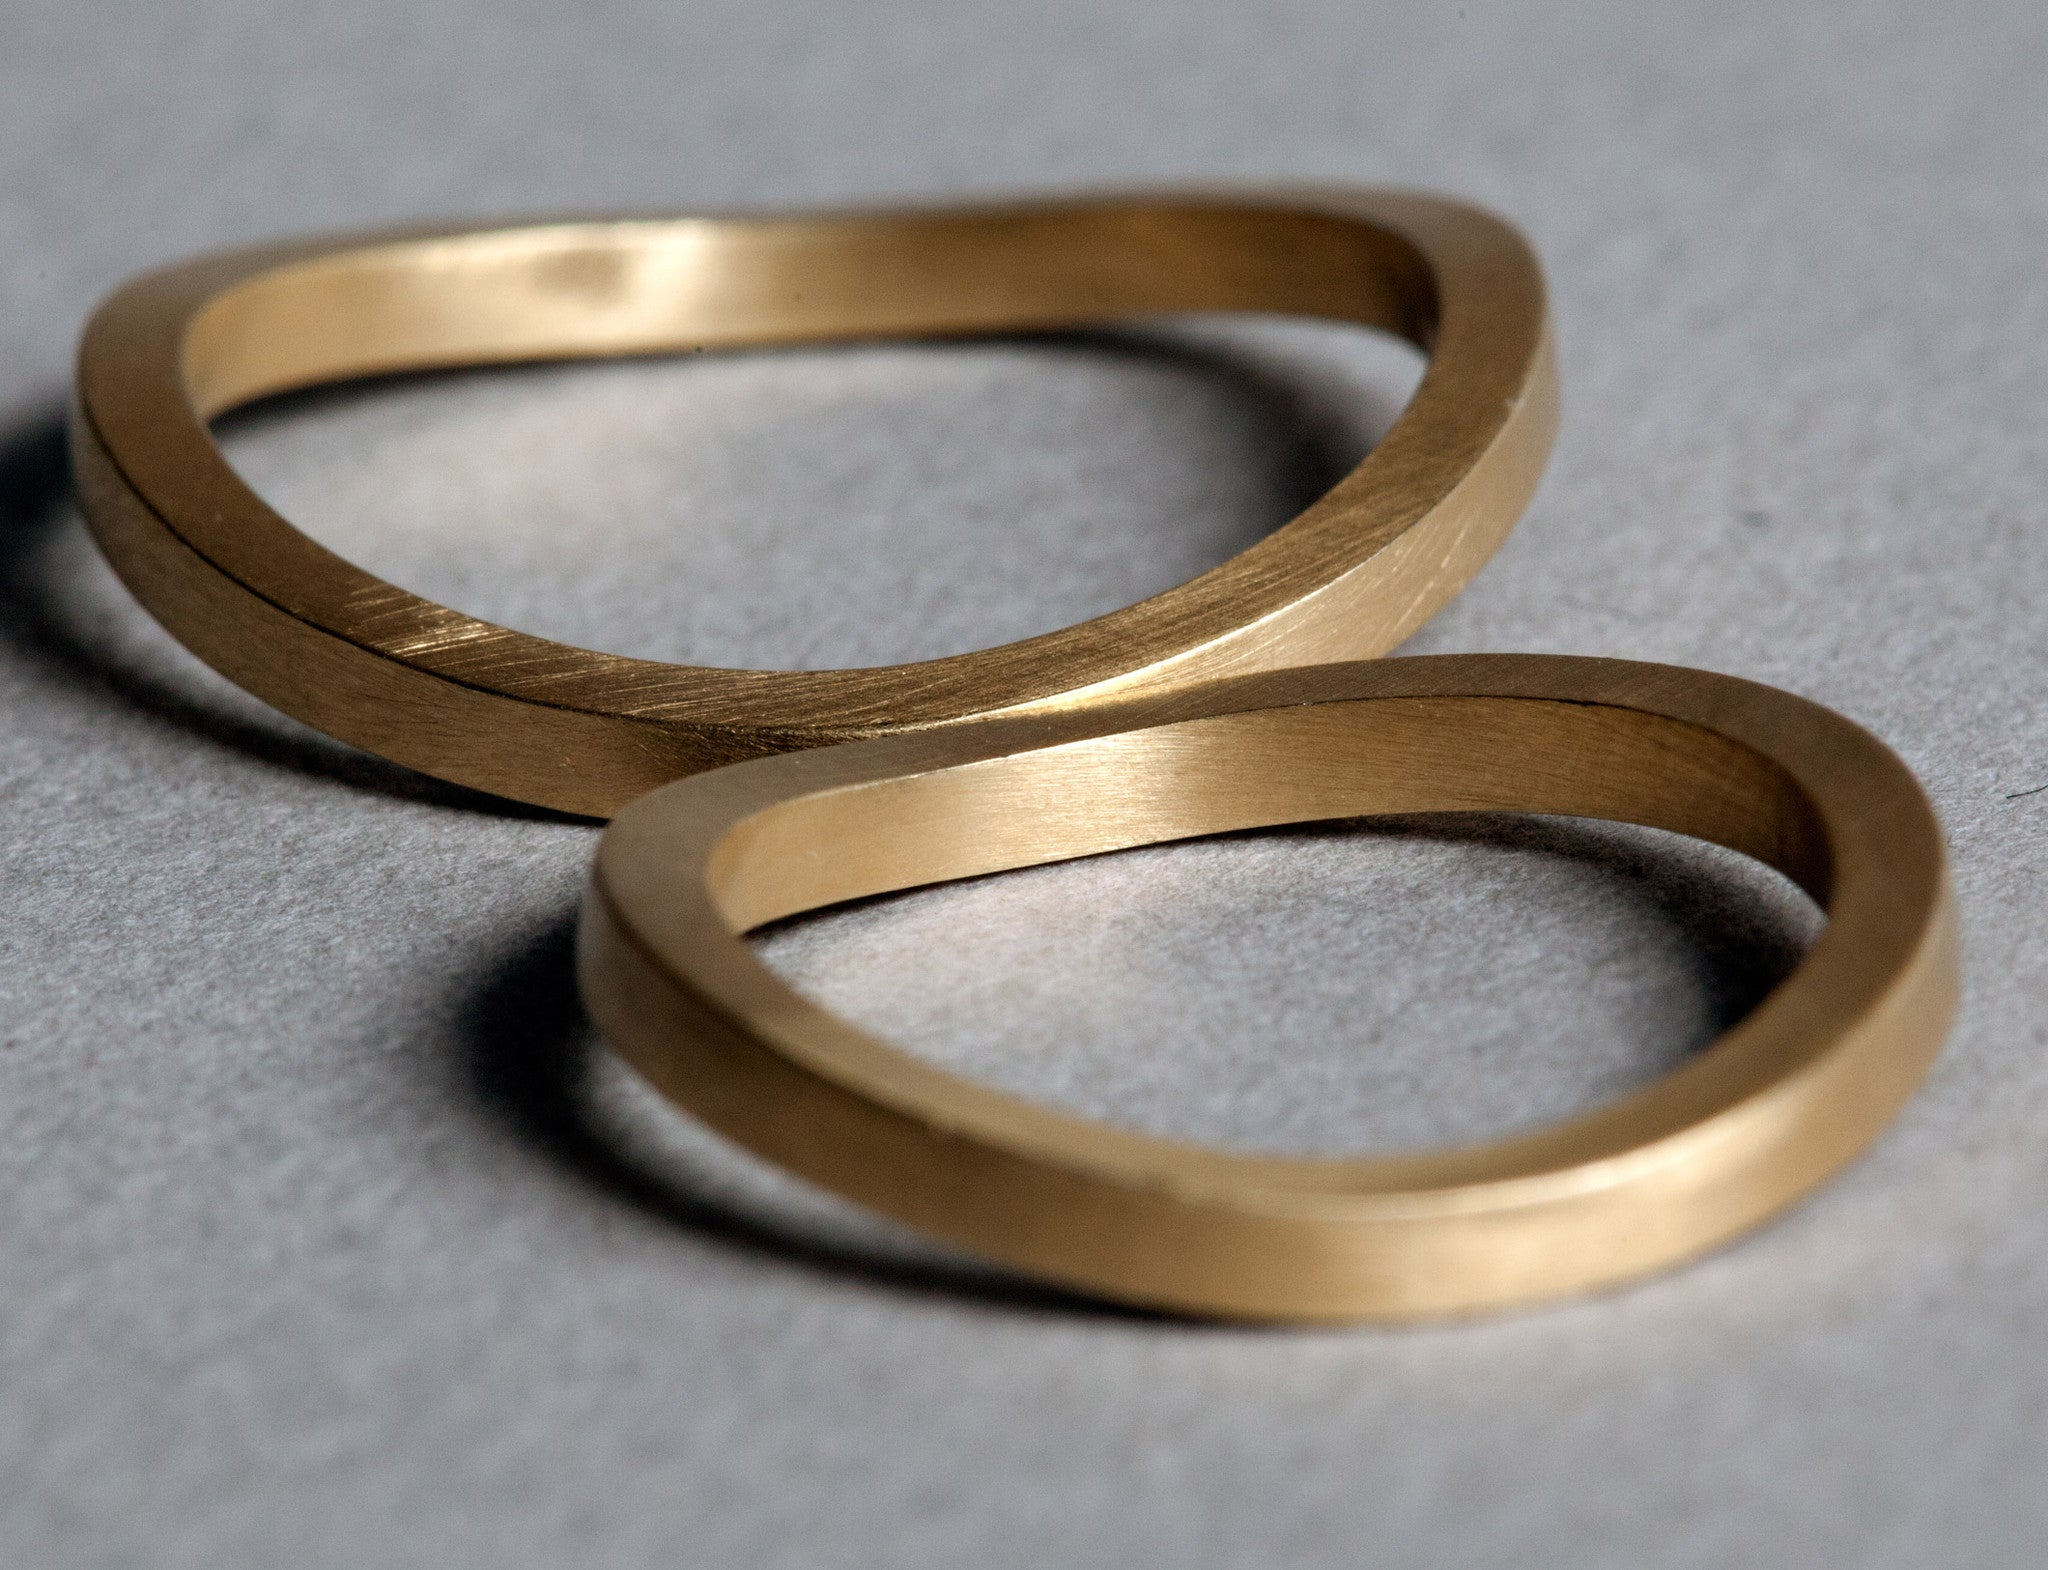 Balance Eco-friendly wedding bands his and her